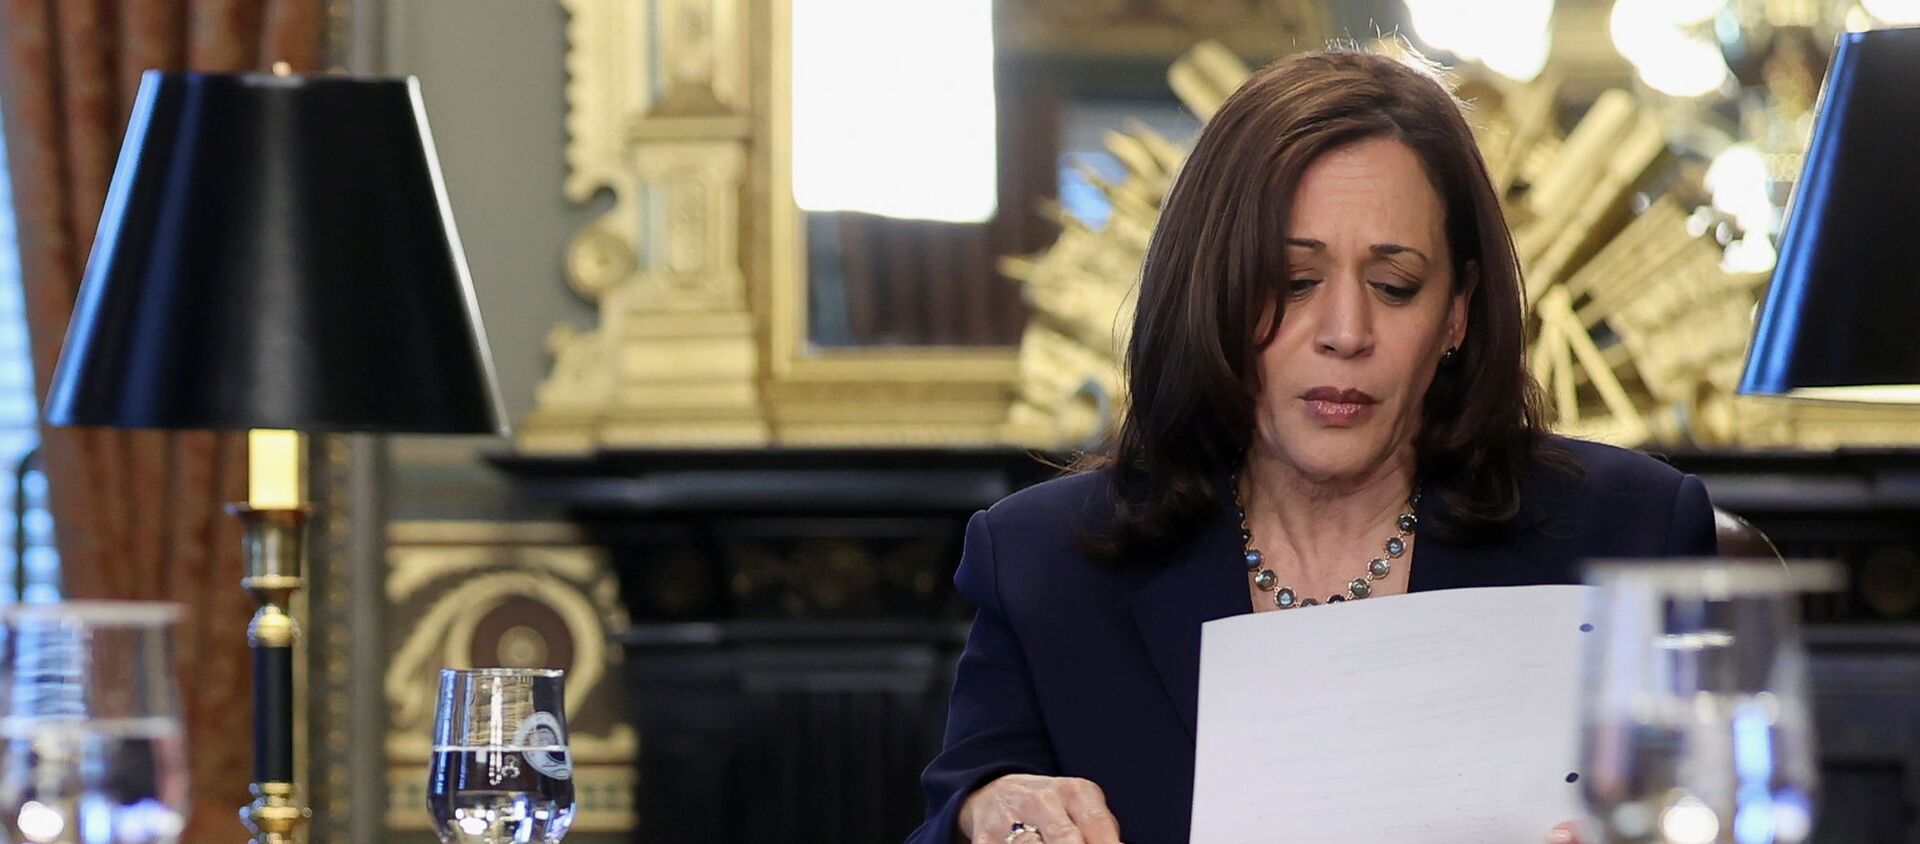 U.S. Vice President Kamala Harris opens the first meeting of the White House Task Force on Worker Organizing and Empowerment - Sputnik International, 1920, 20.05.2021